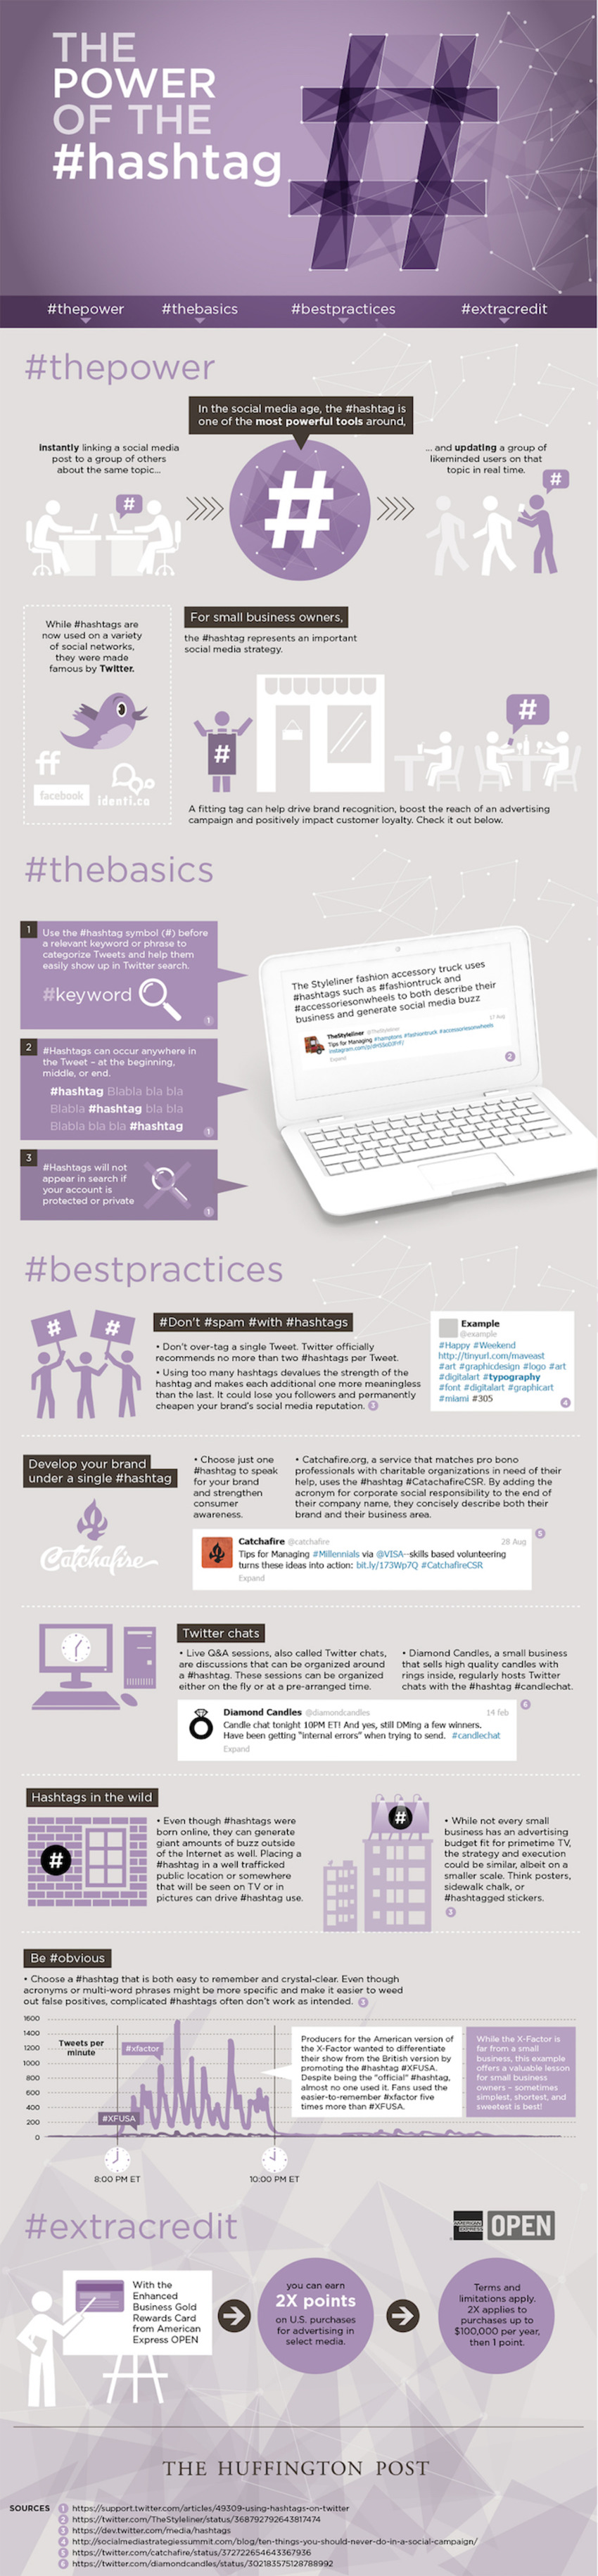 A Simple Guide to Using Hashtags on Twitter [Infographic] - HubSpot | The MarTech Digest | Scoop.it